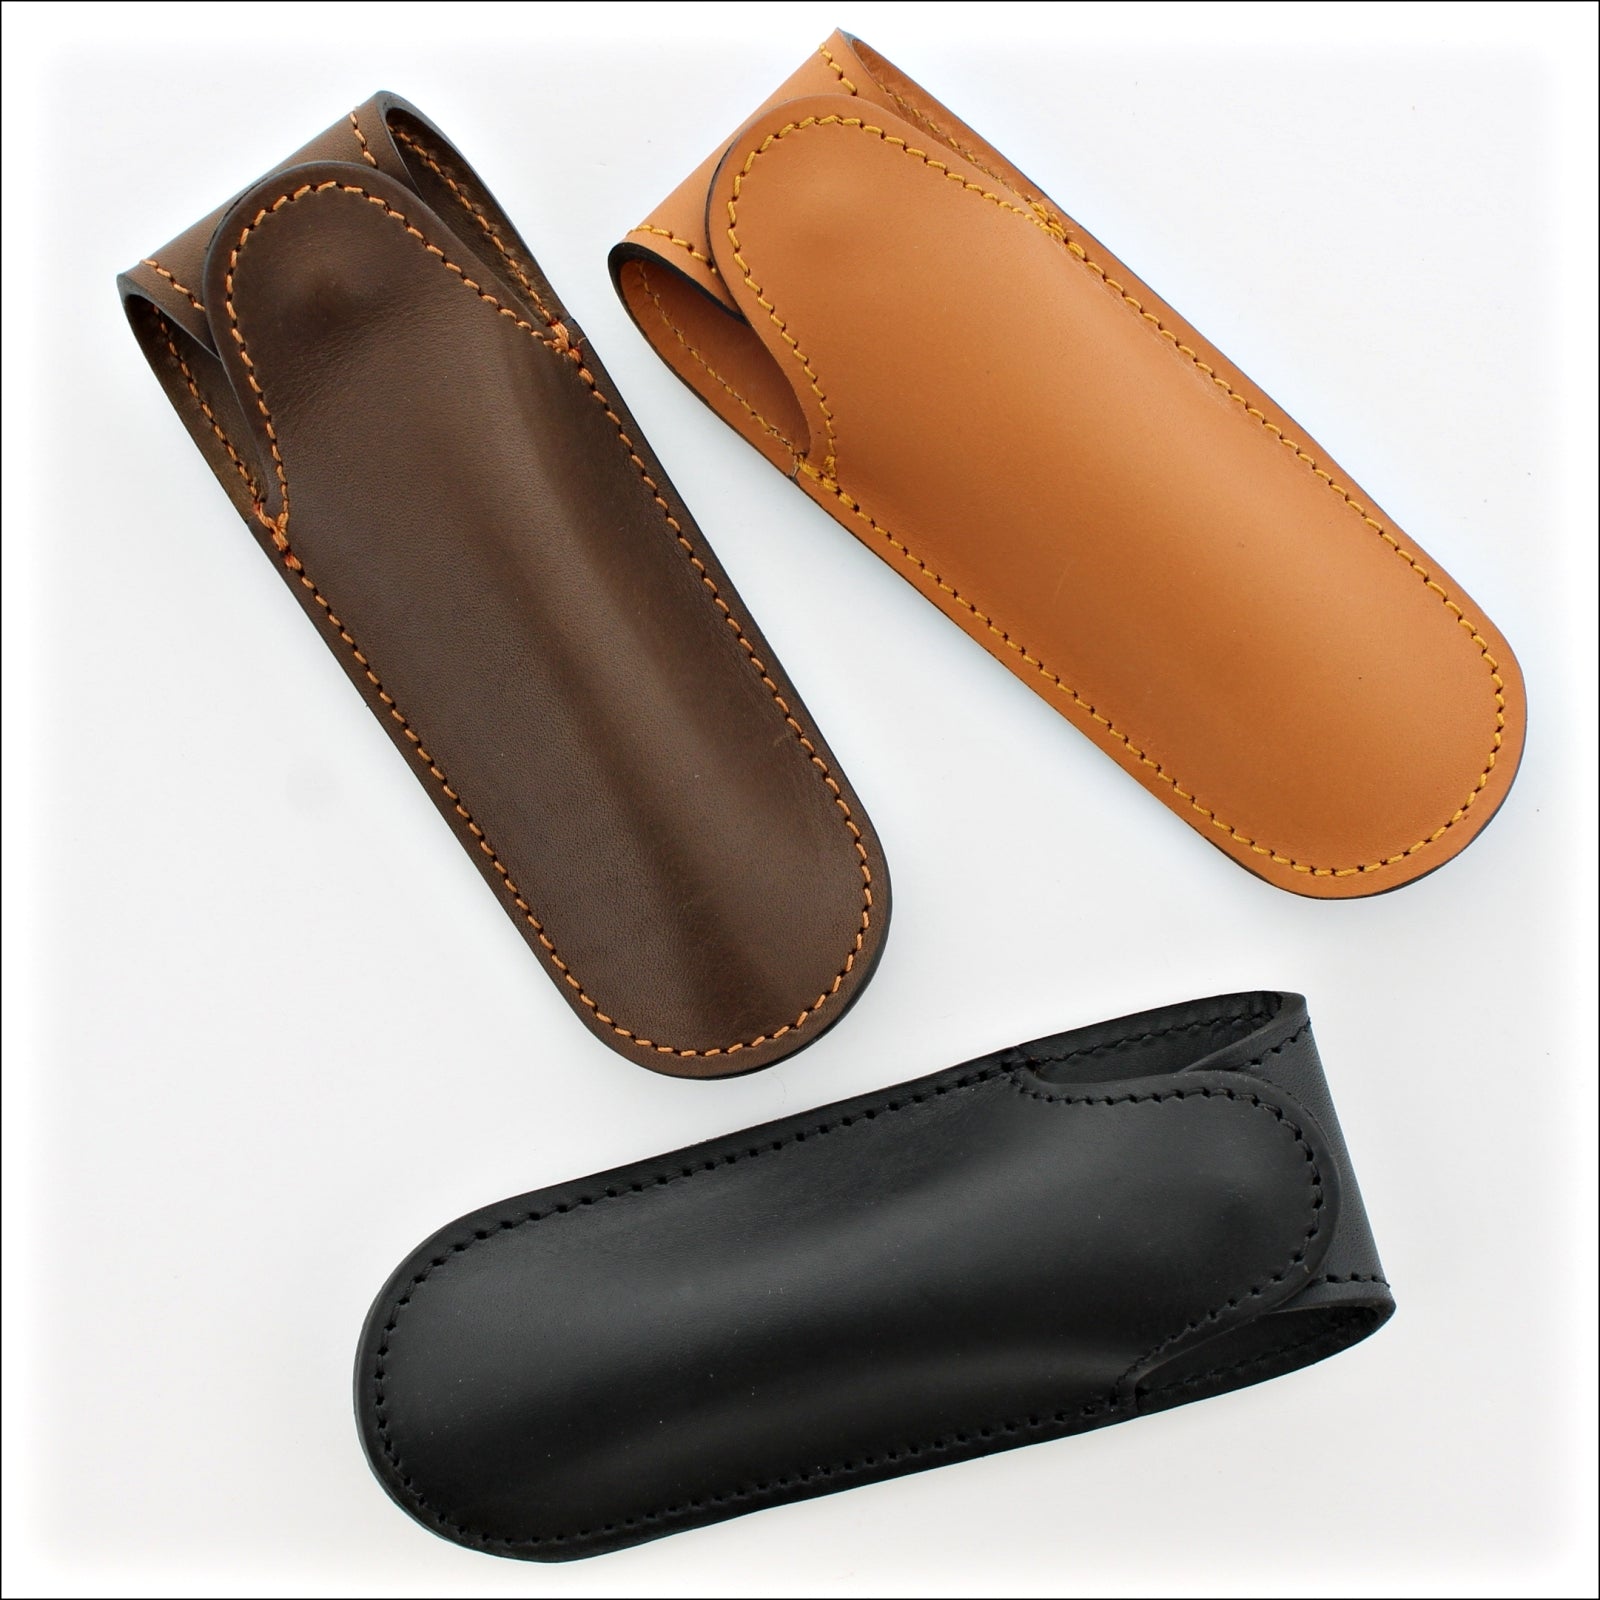 Chasse Leather Sheath for 11 to 14 cm Pocket Knives